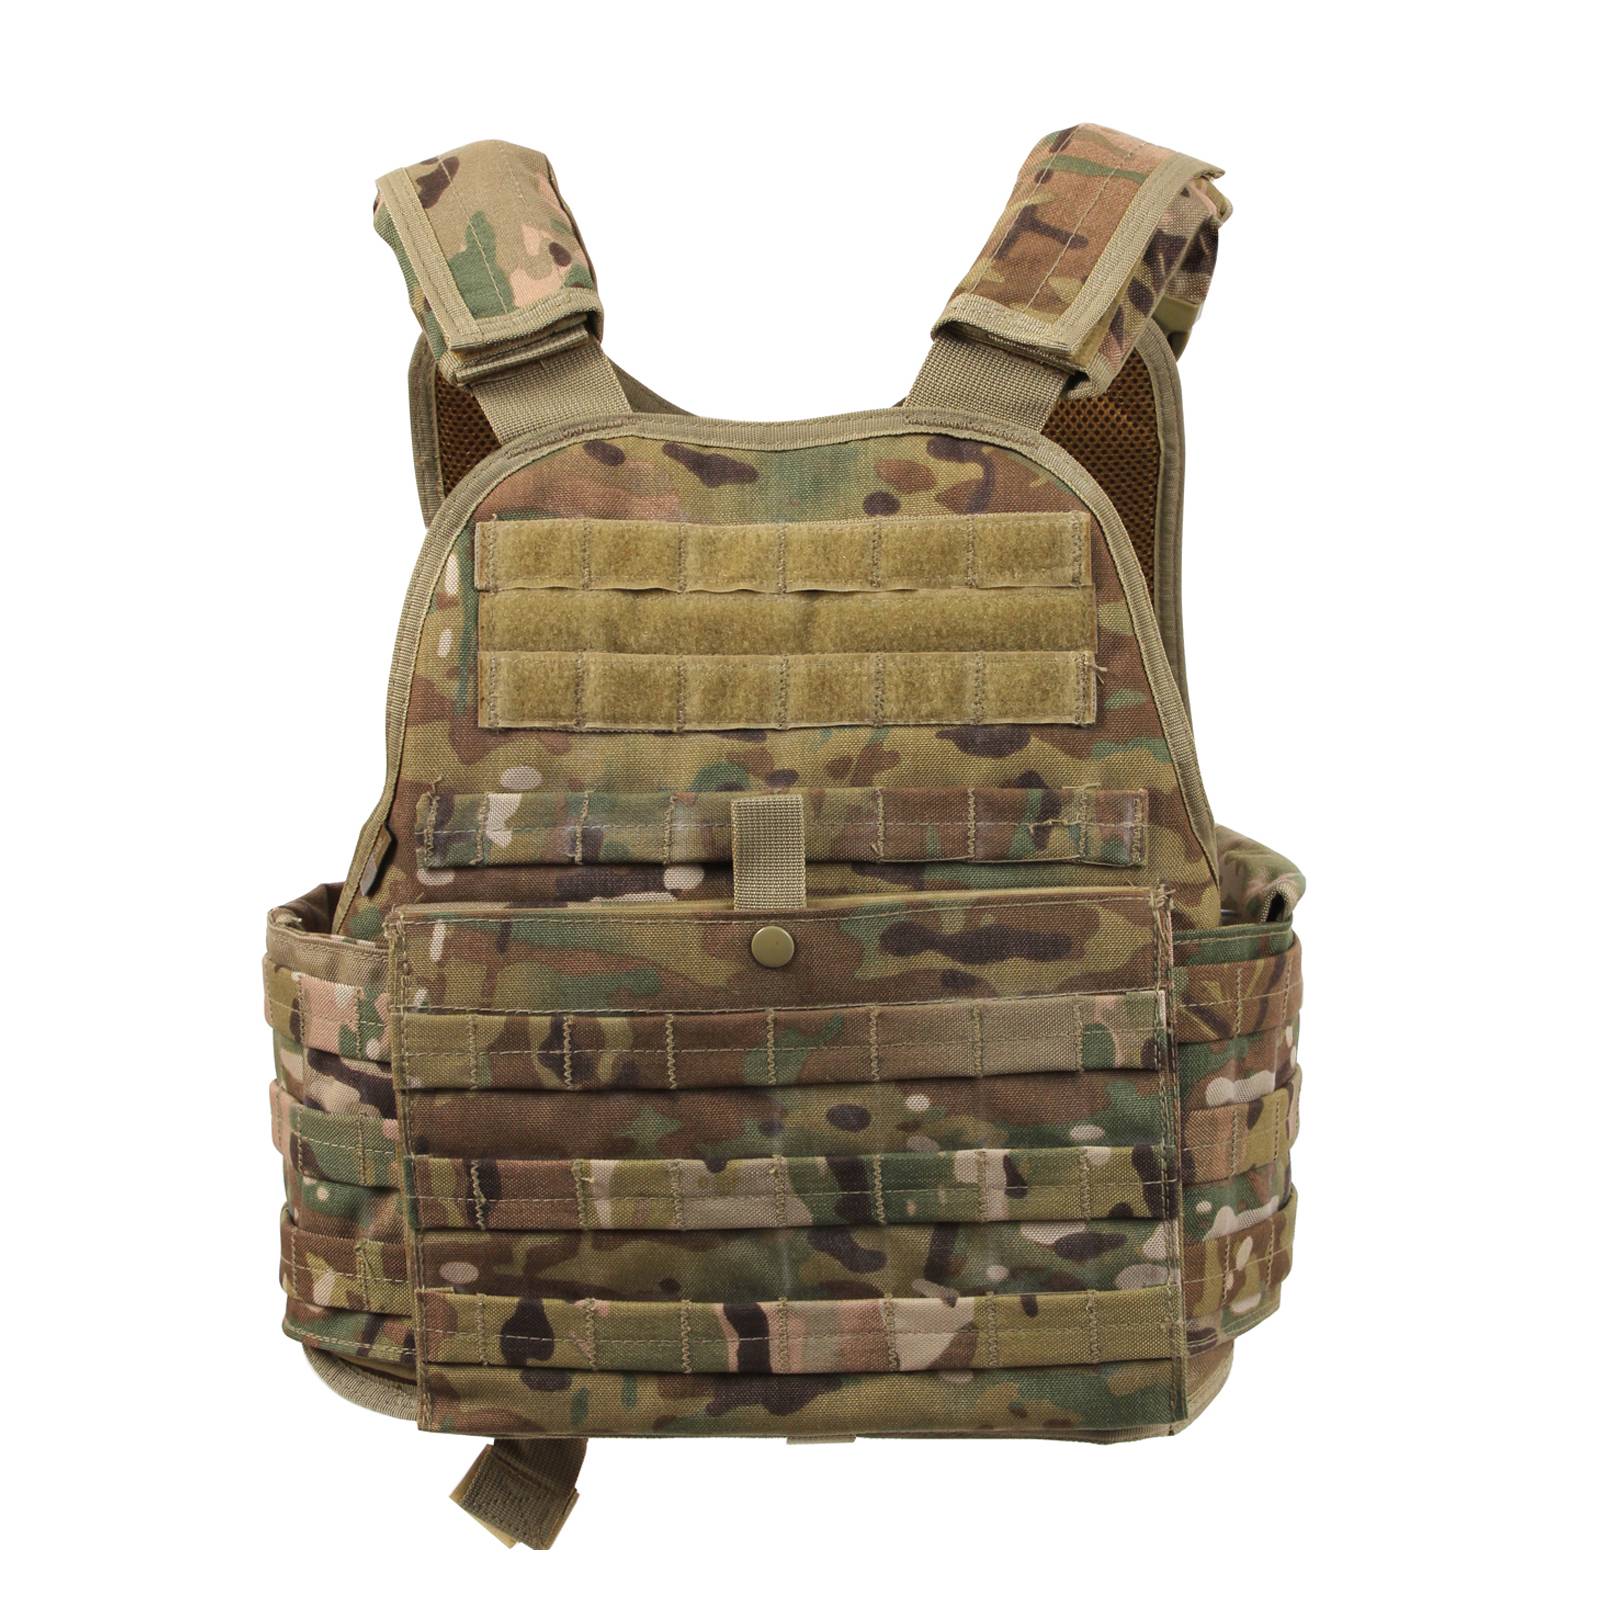 Brand New Free Shipping One Size Fits Most 9+1 Nylon Tactical Paintball Vest